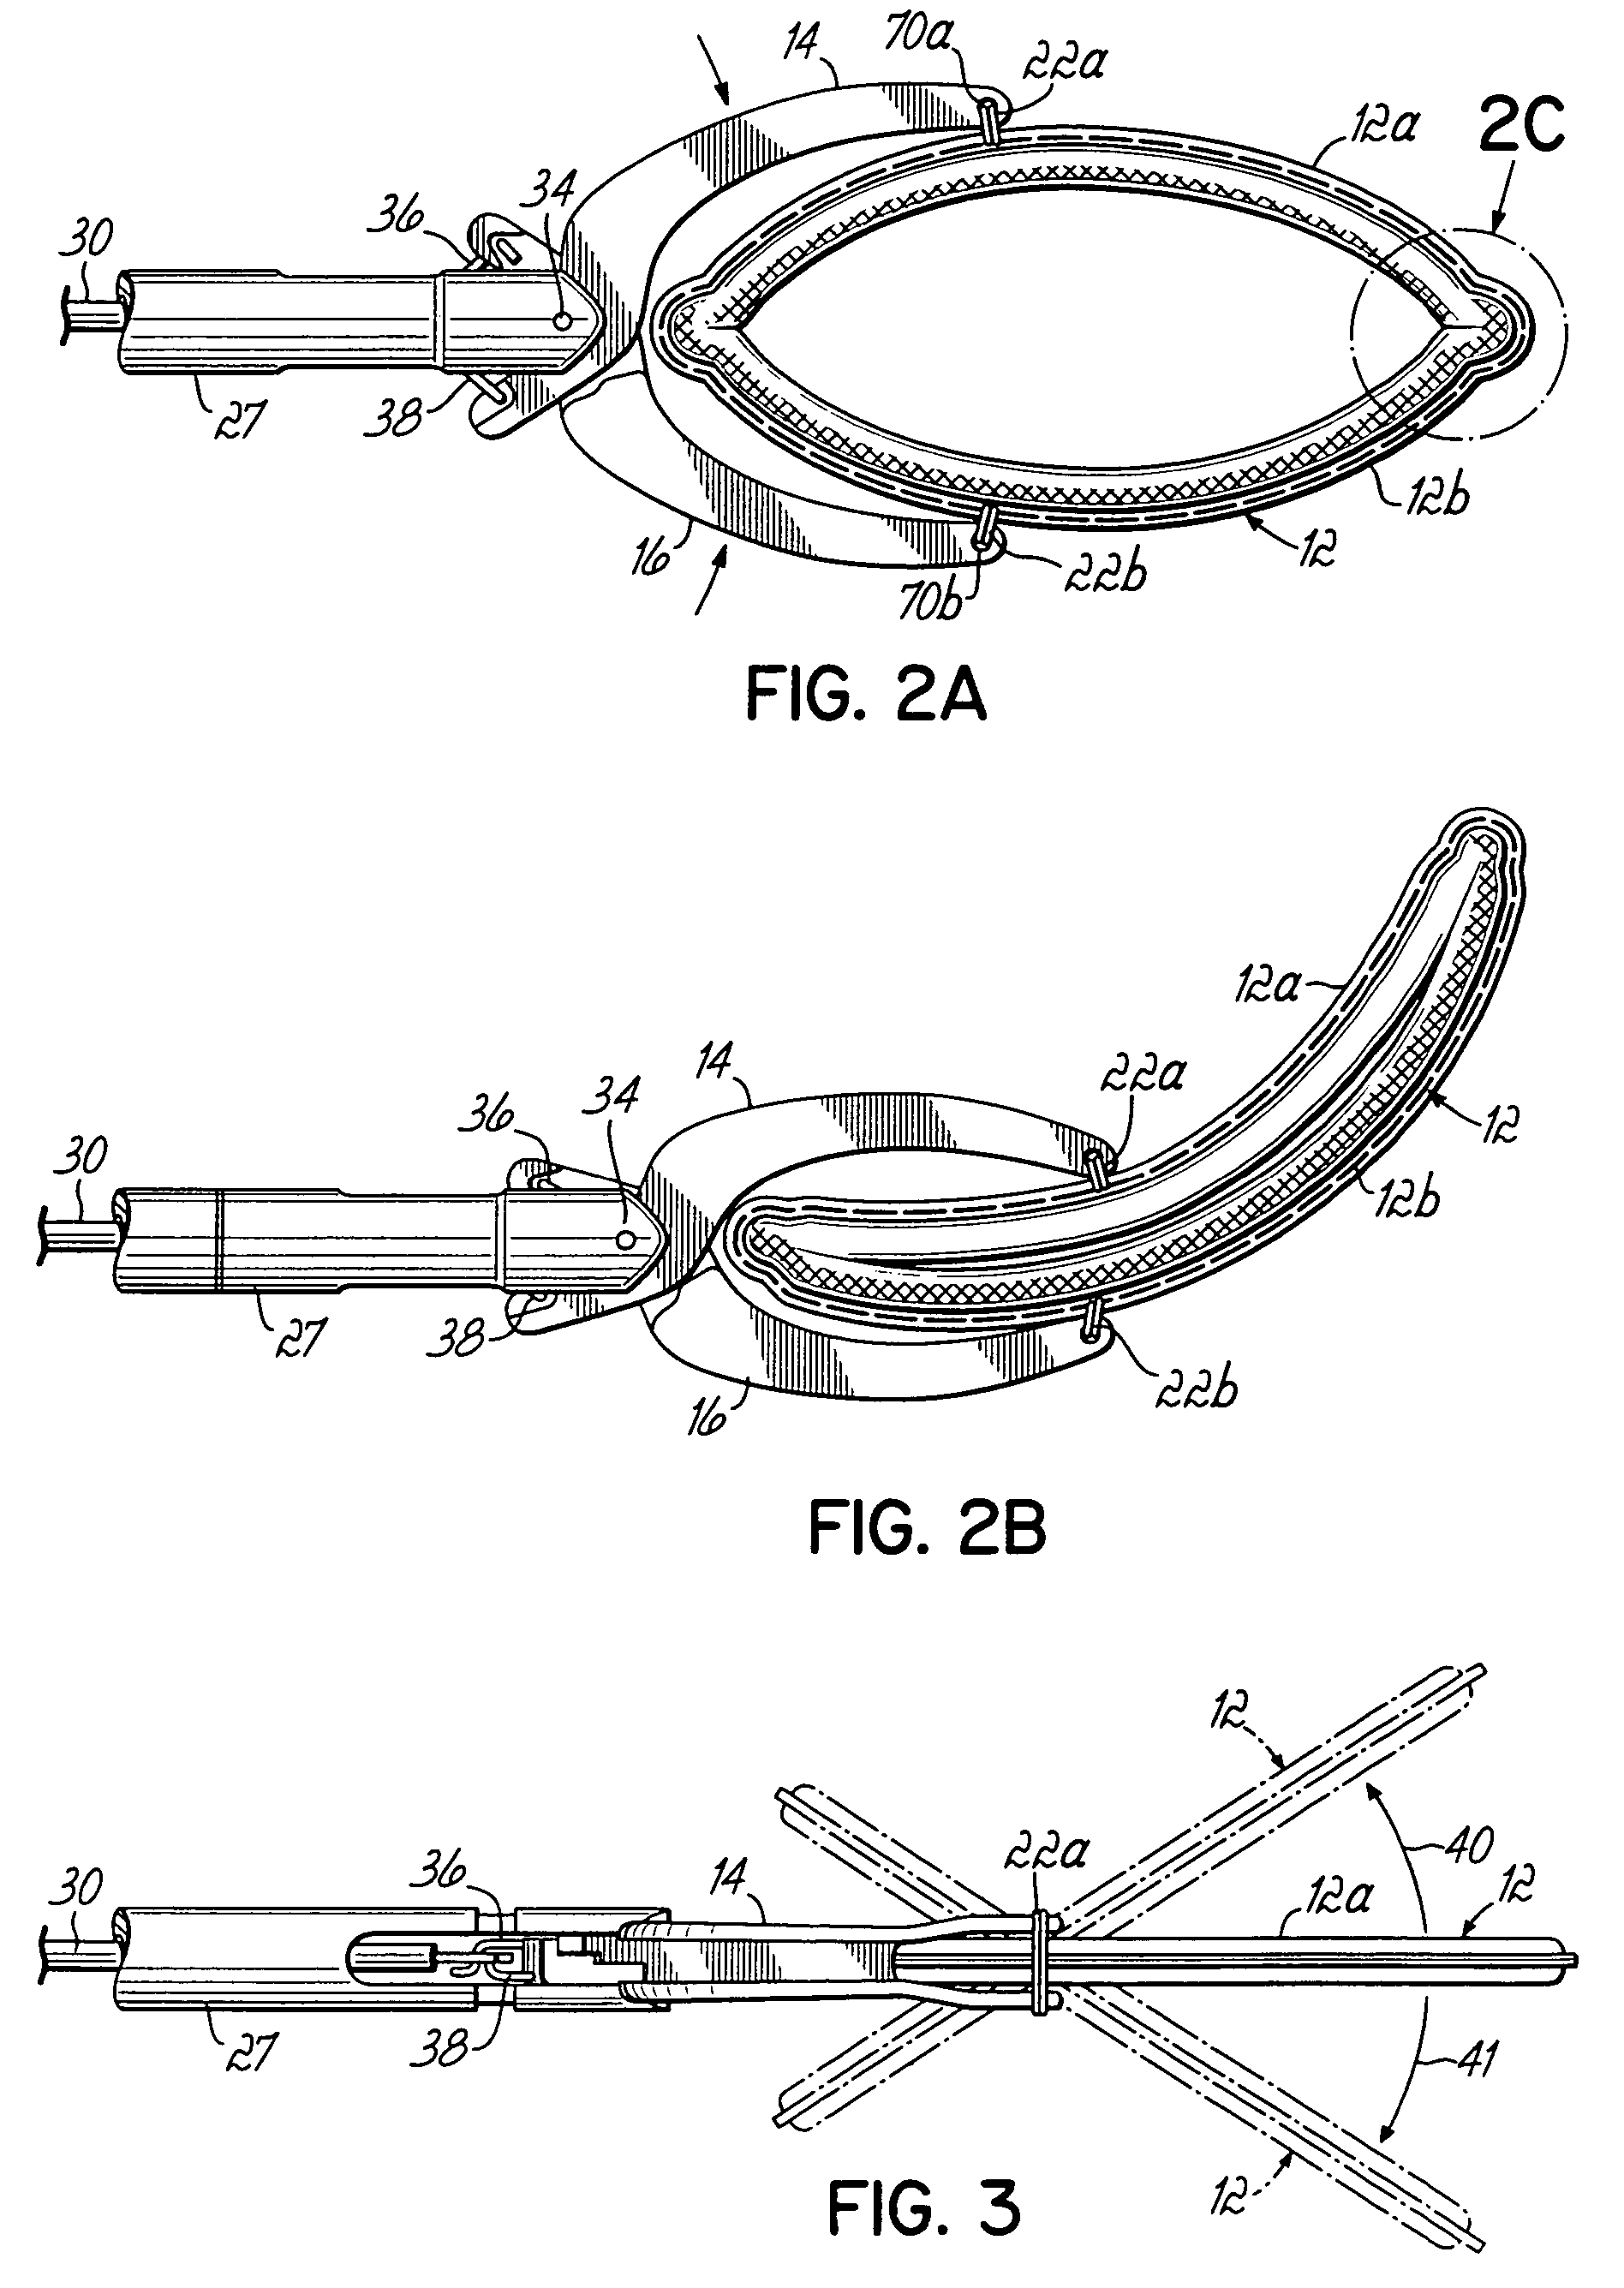 Apparatus and methods for occluding a hollow anatomical structure